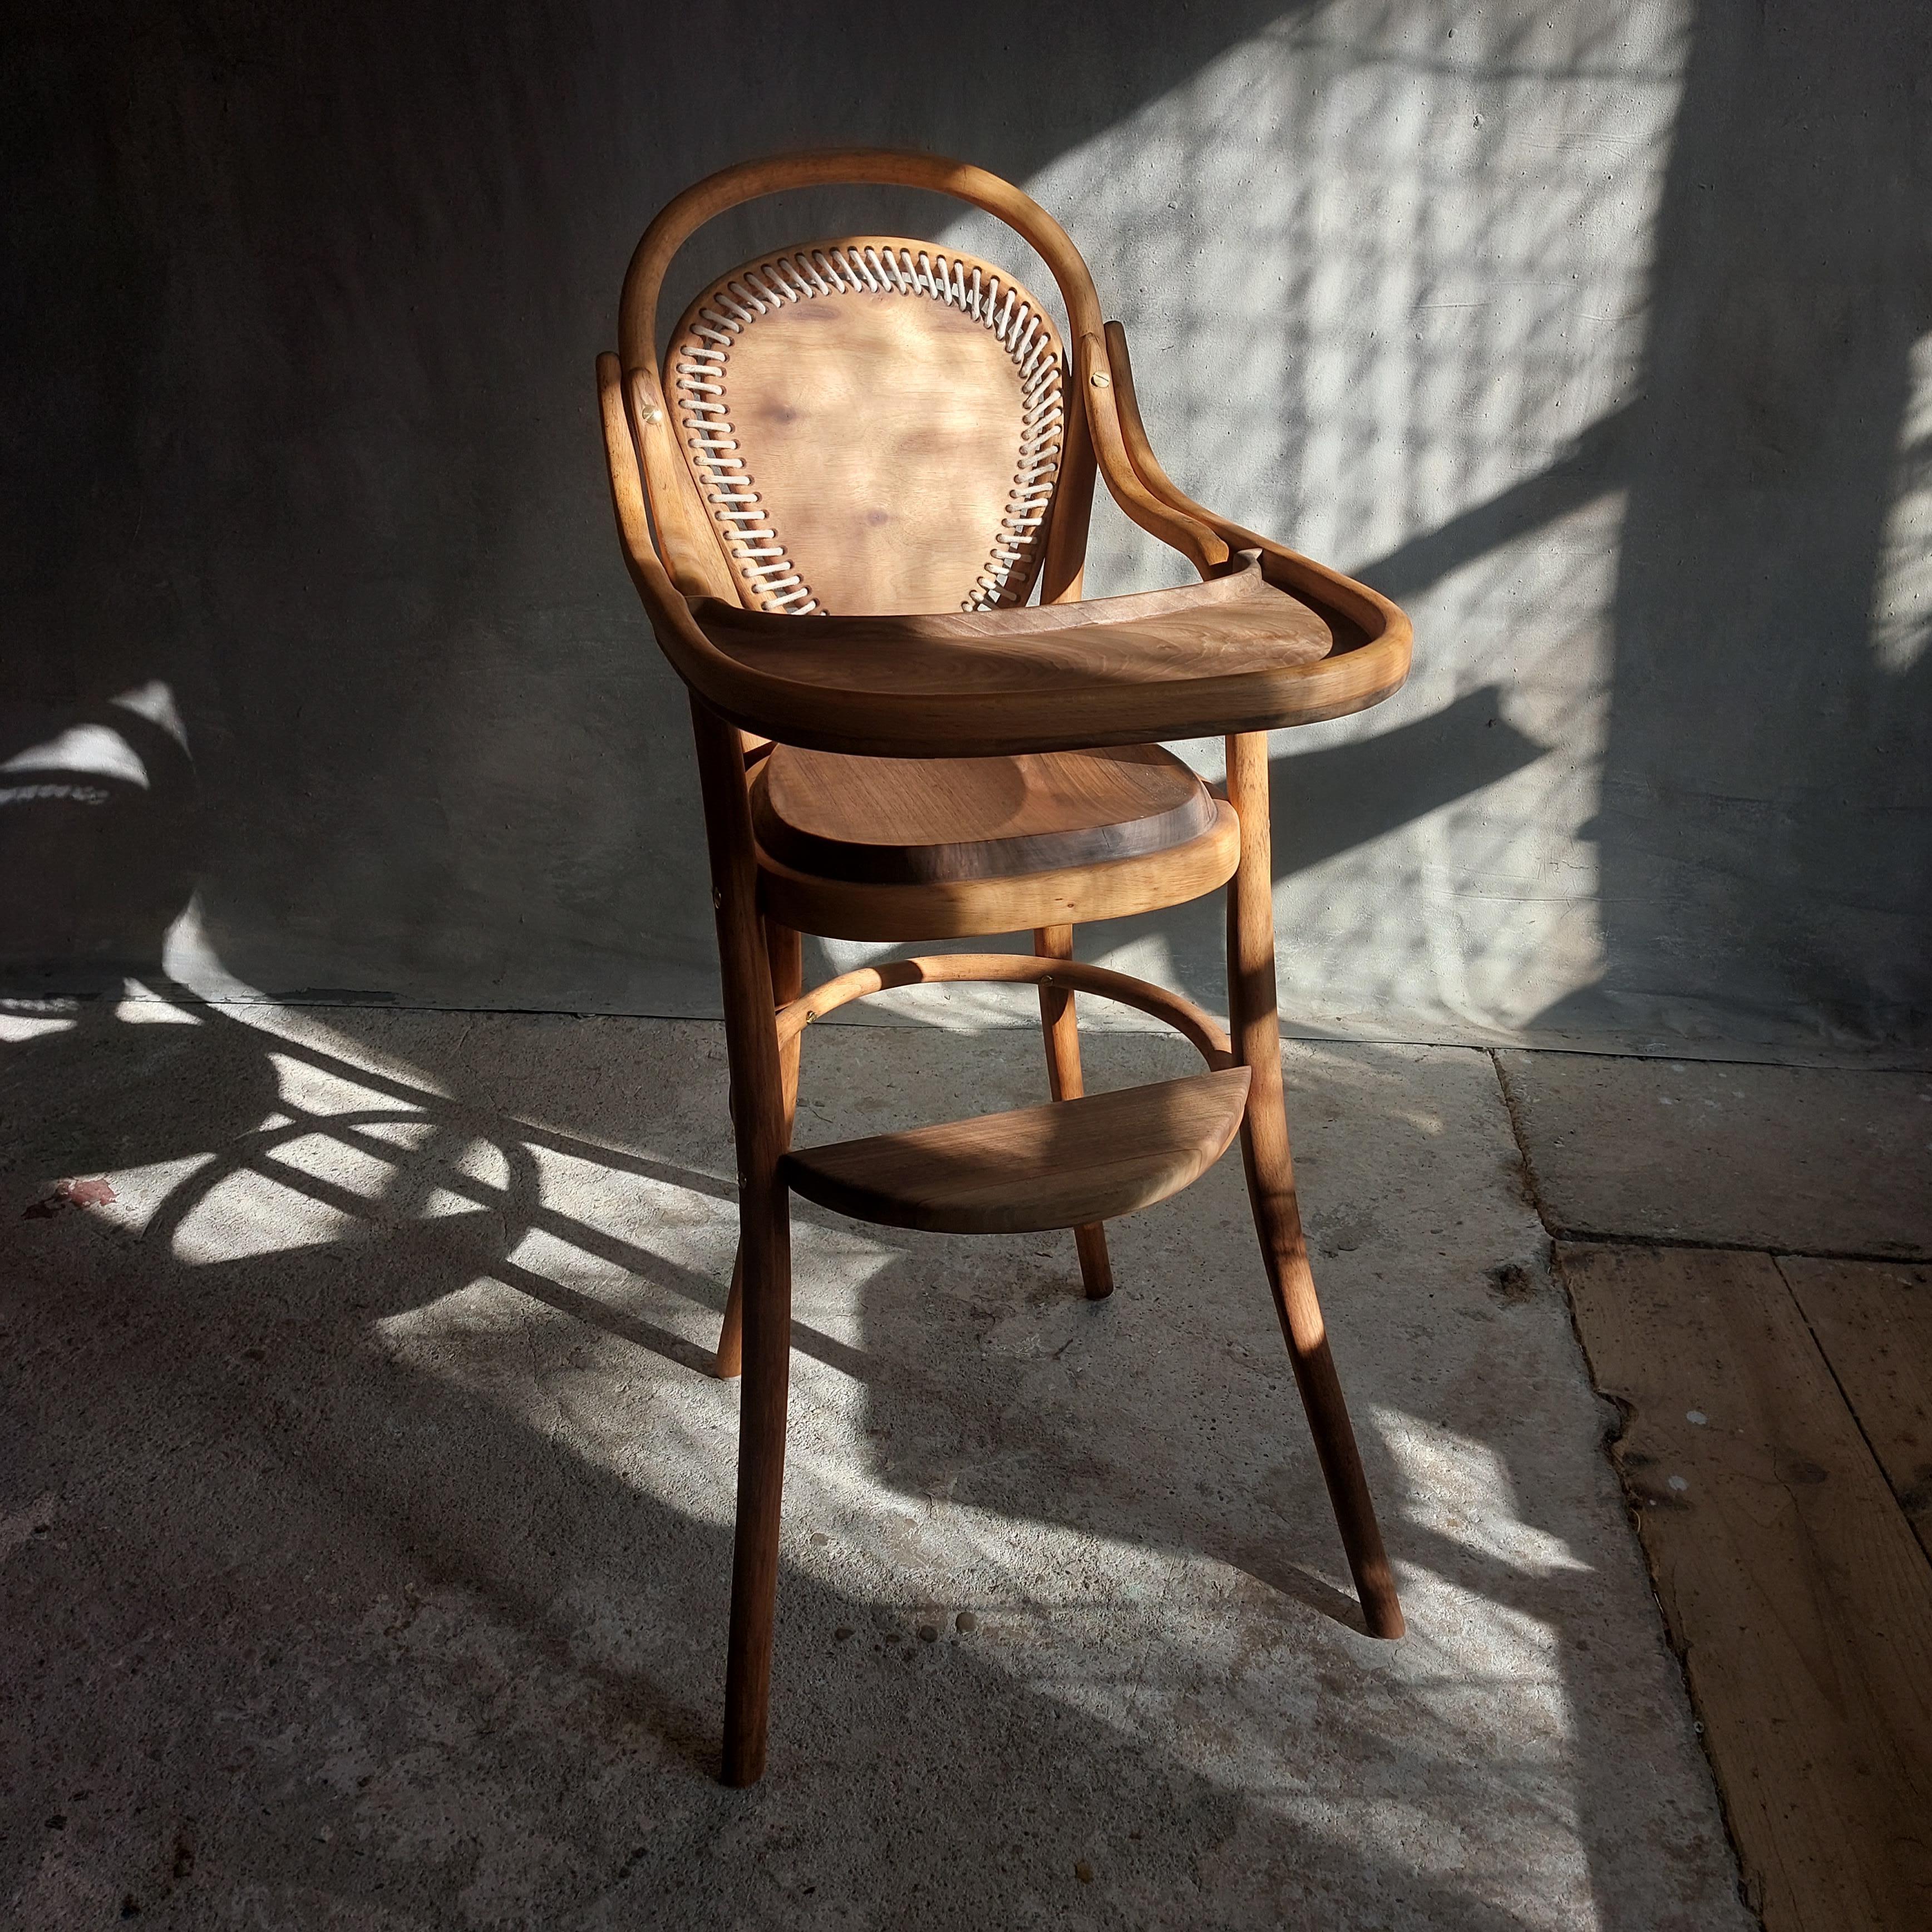 Thonet Toddler High Chair.
Don't miss out on the chance to enjoy this one of a kind time traveller.

Manufactured by Michael Thonet in the mid 19th century, the base found discarded on the street near the French embassy in Sofia some years